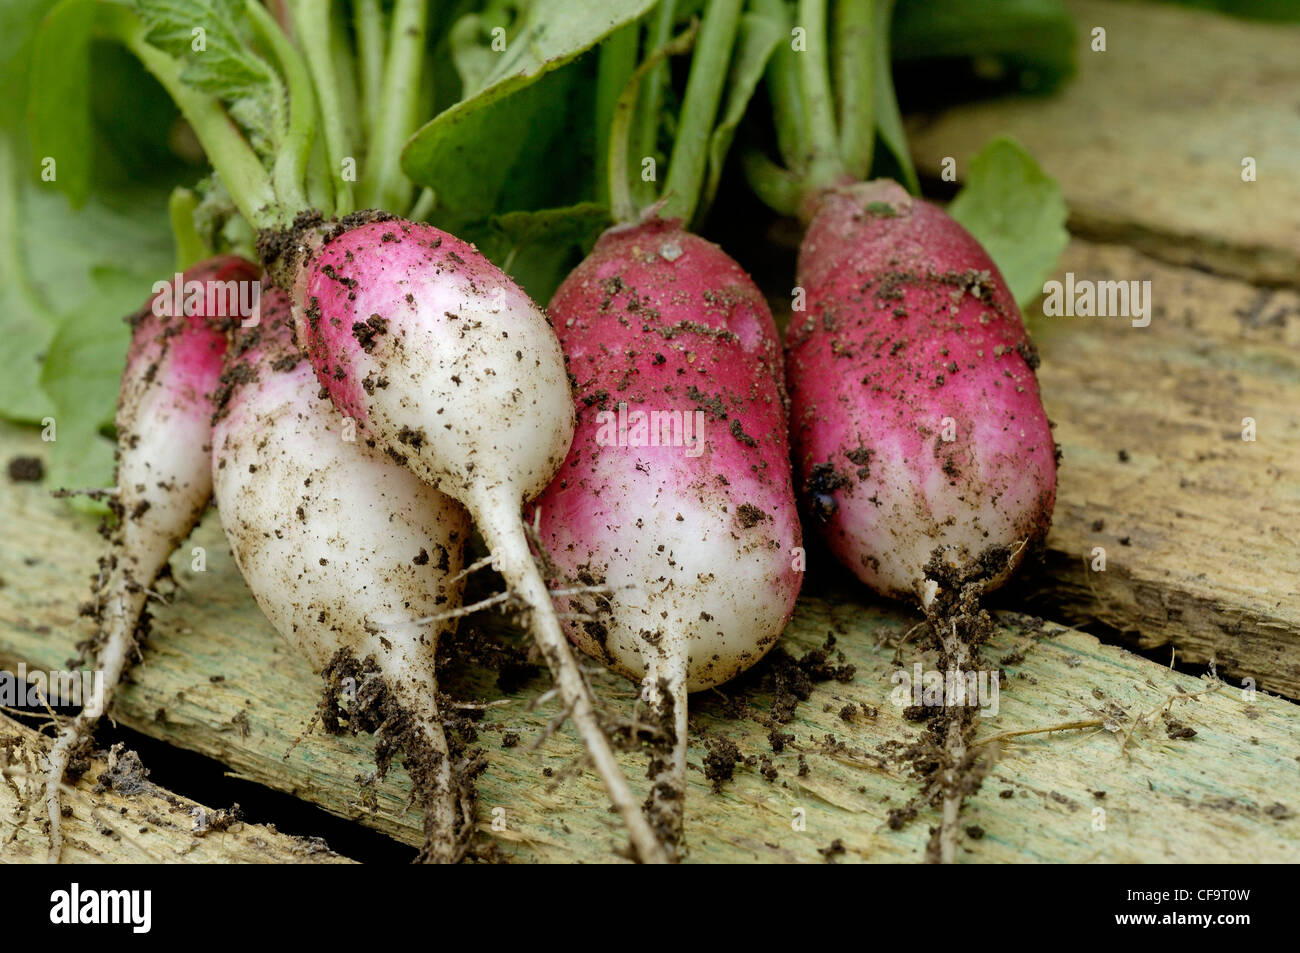 Home grown French Breakfast radishes Stock Photo